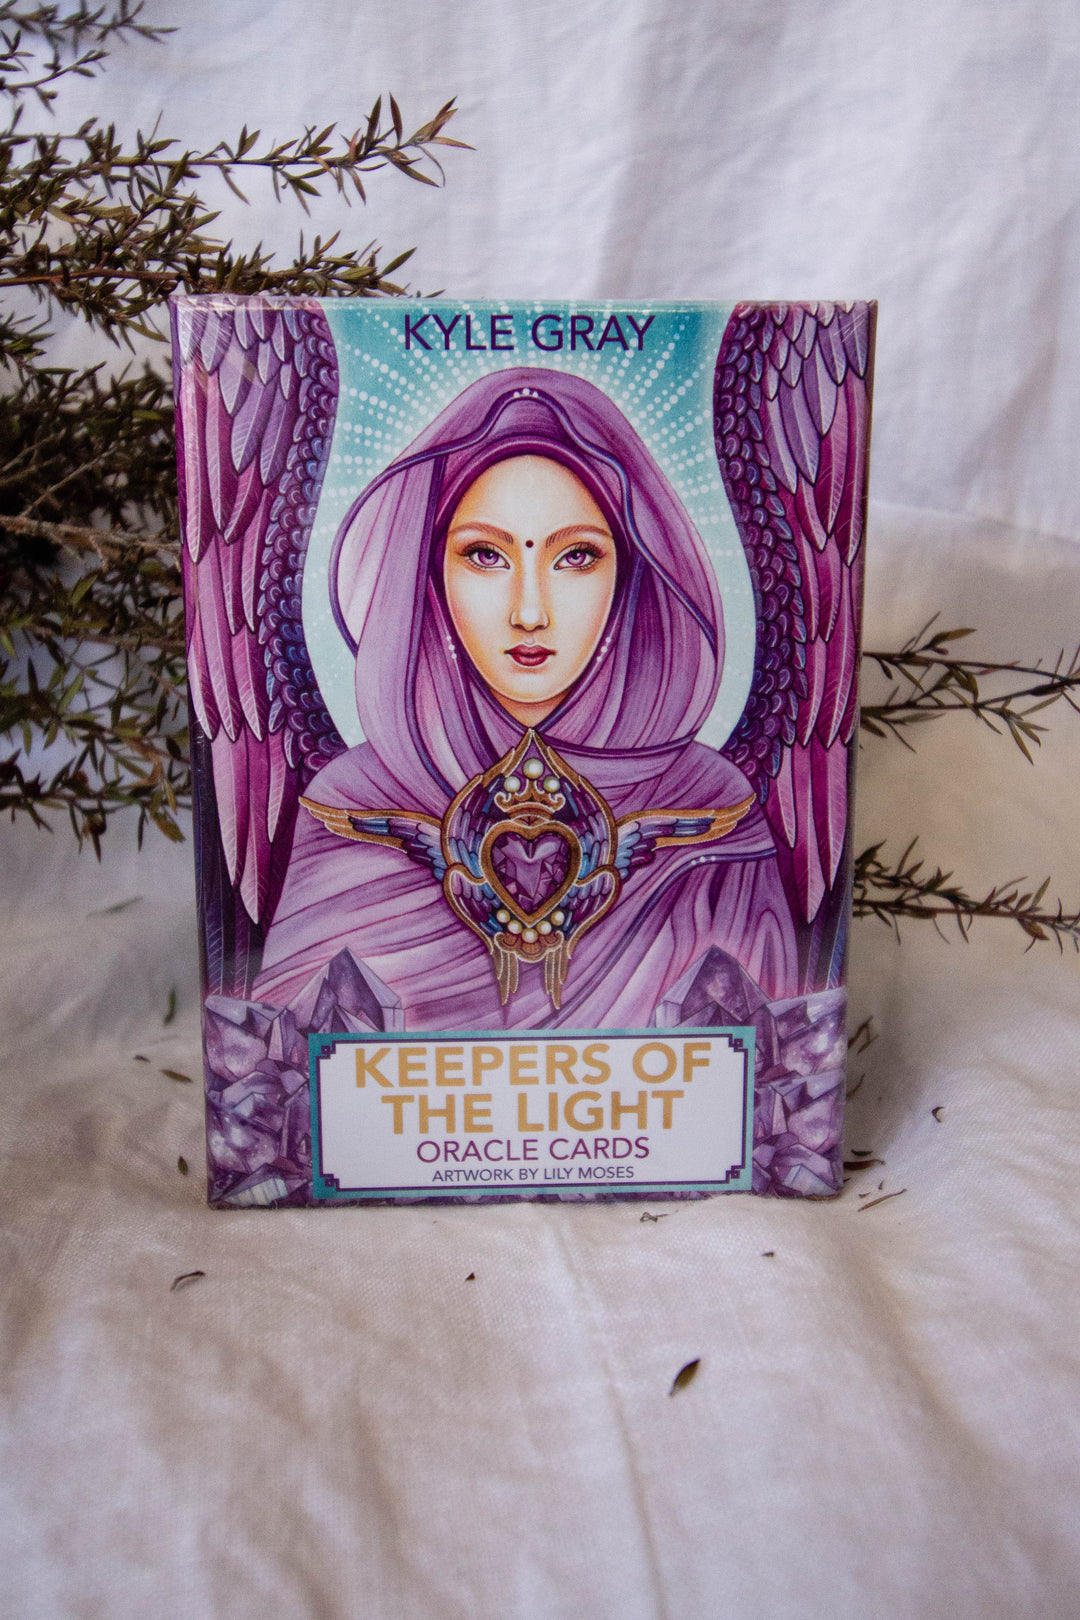 KEEPERS OF THE LIGHT ORACLE CARDS